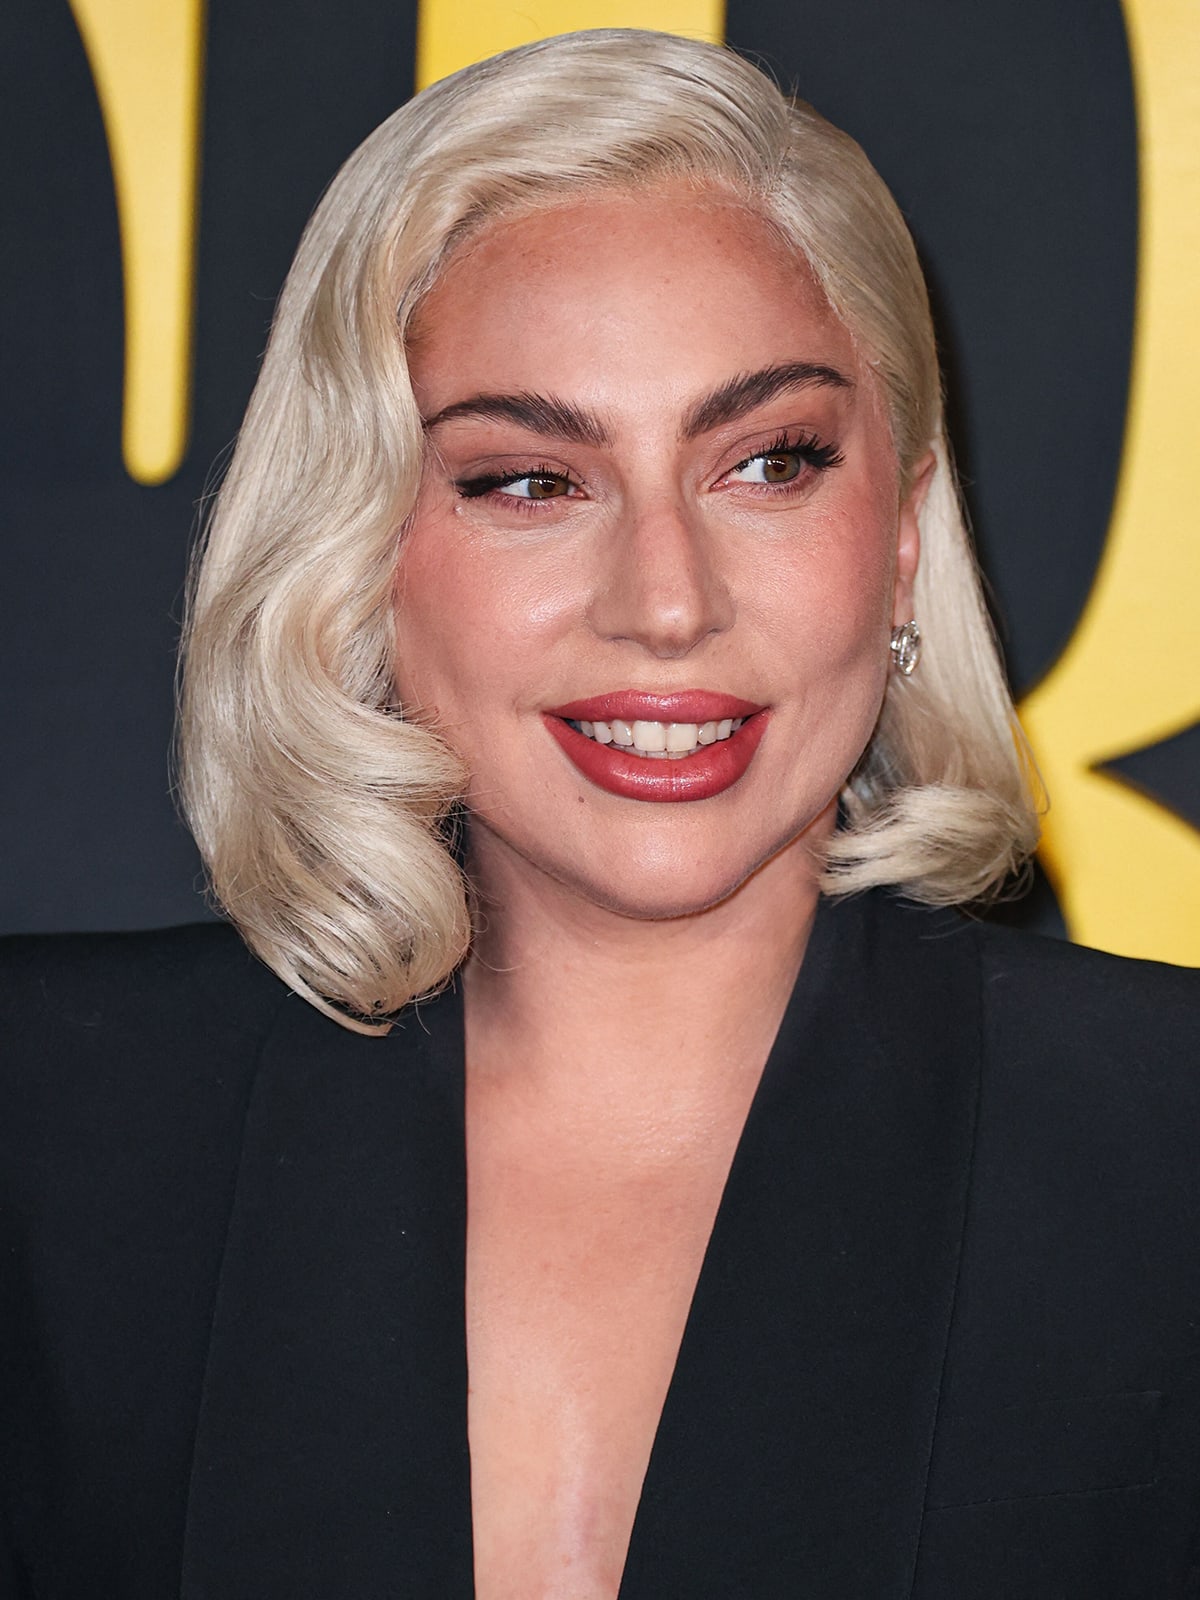 Lady Gaga channels Old Hollywood glamour with retro waves hairstyle and red lipstick